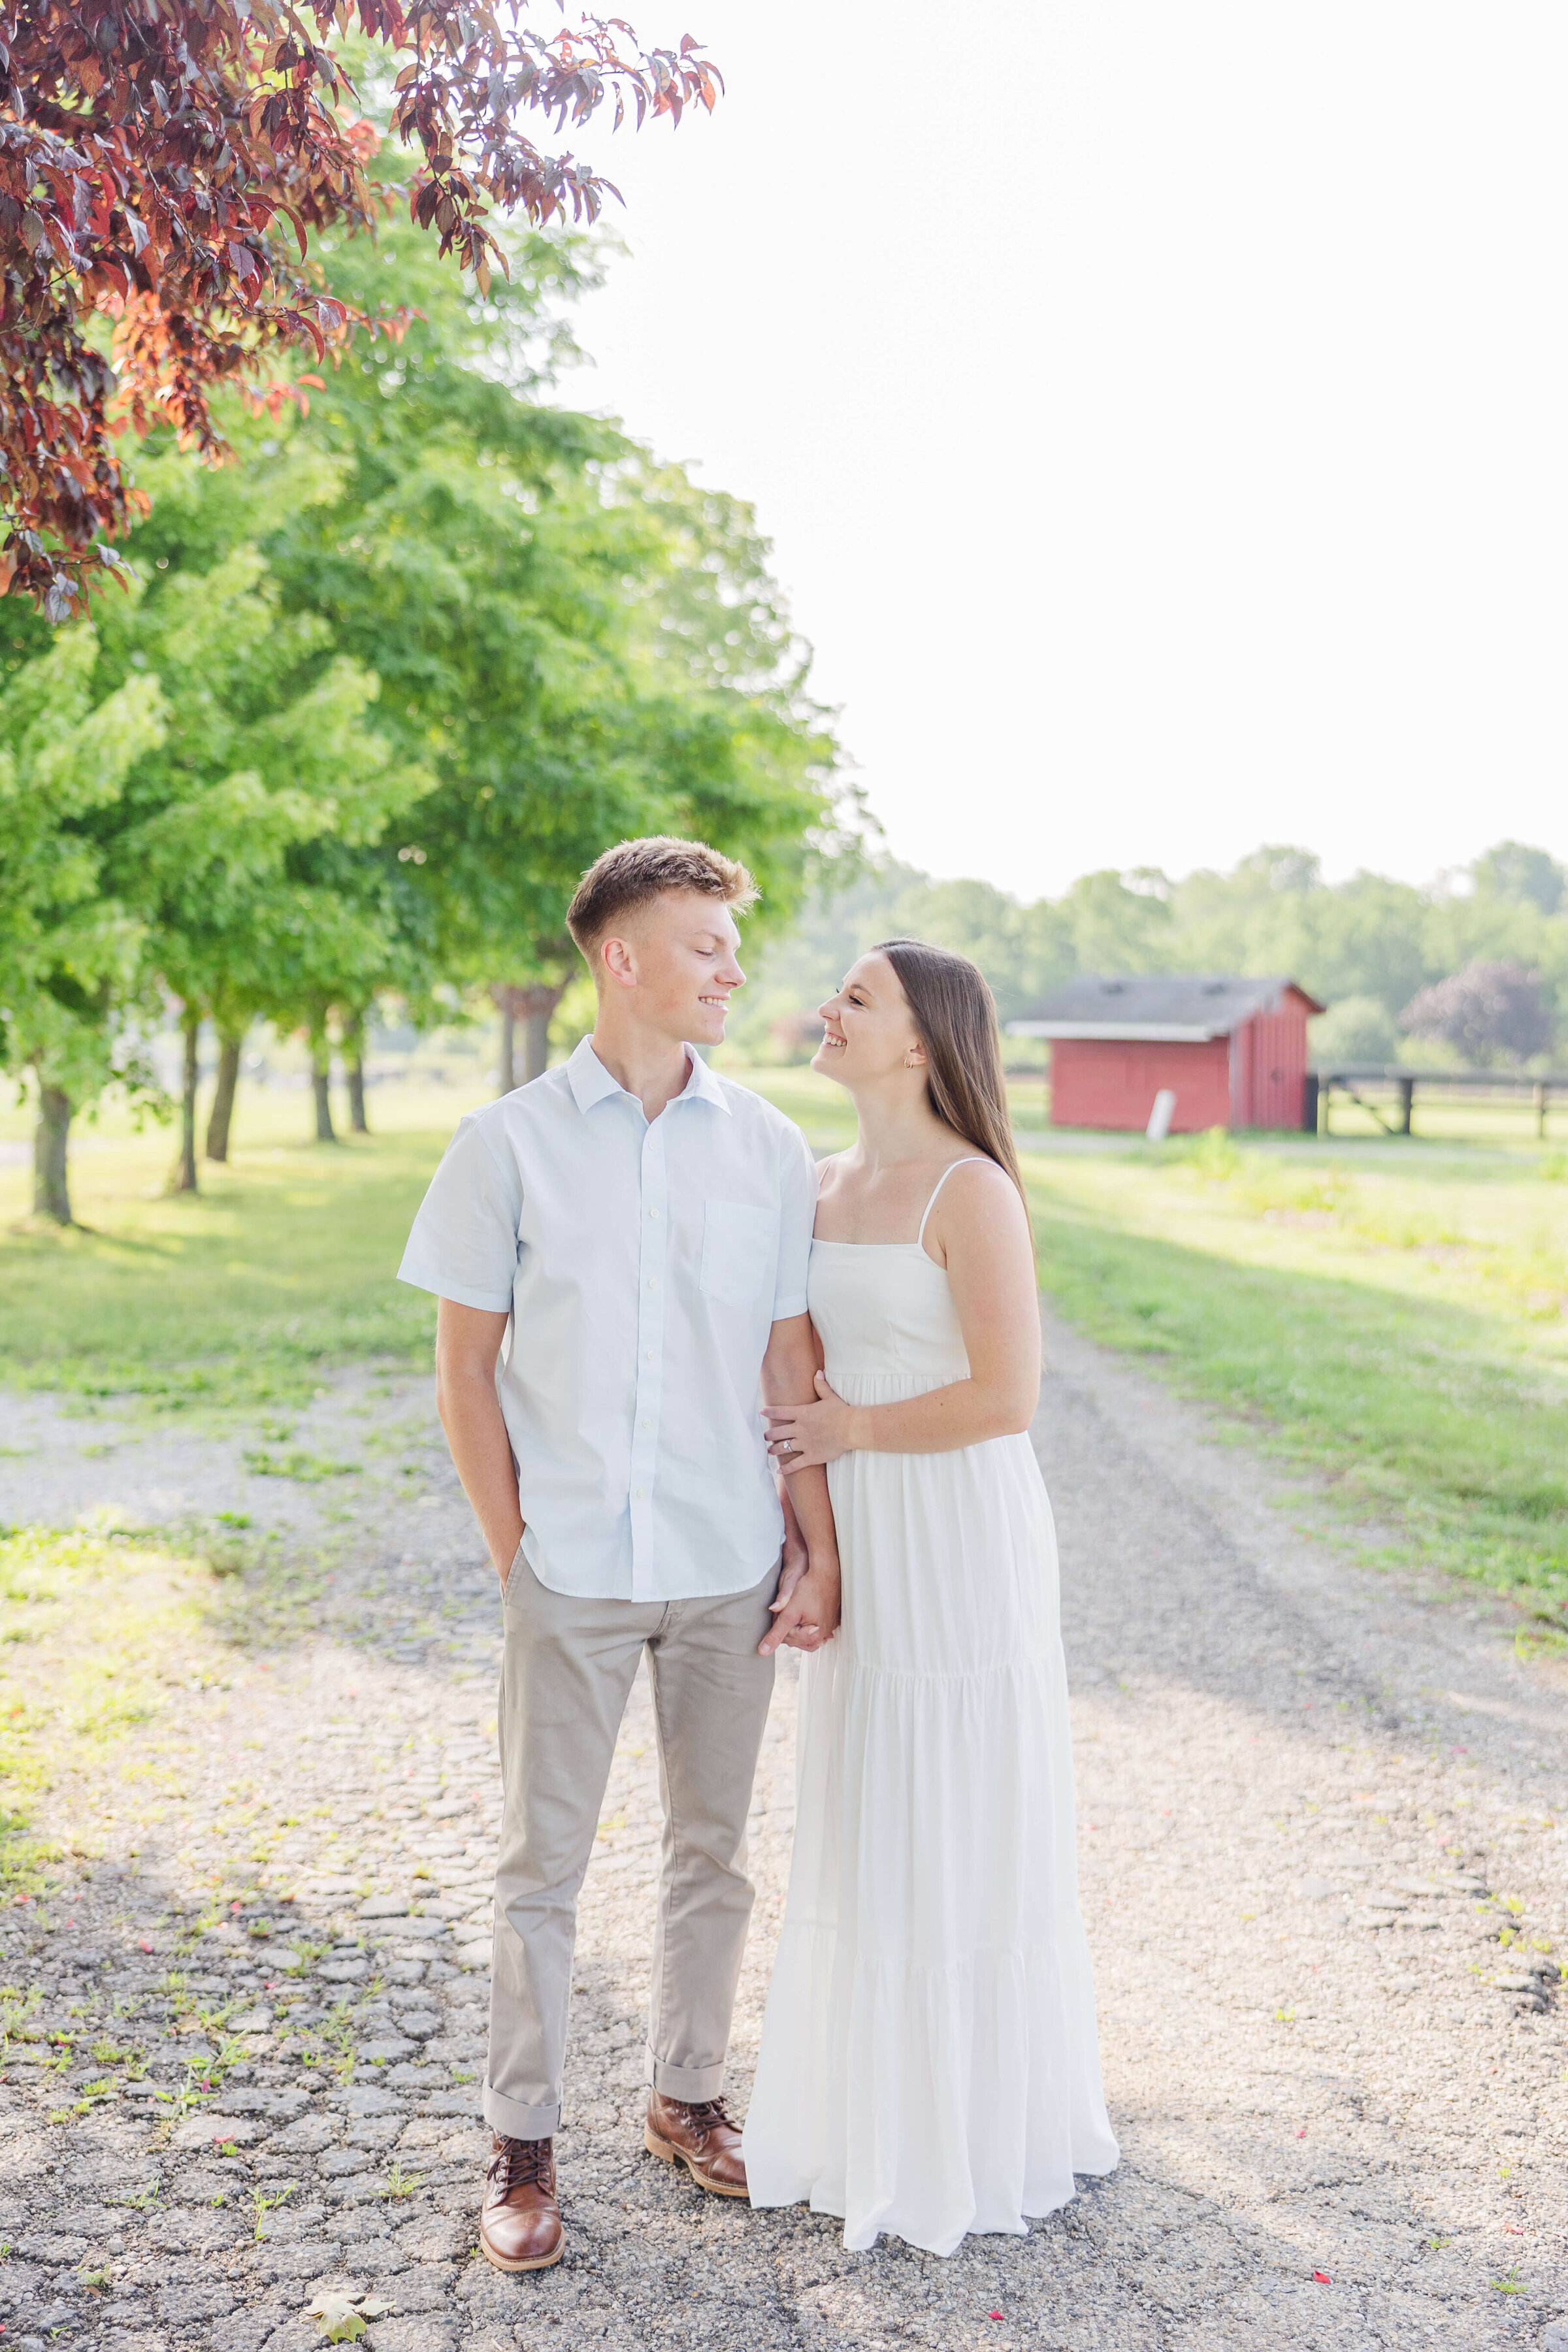 A man in khakis and a light blue shirt holds hands with his fiancee who is wearing a white dress. They are walking down an orchard path as the sun shines brightly in back of them.